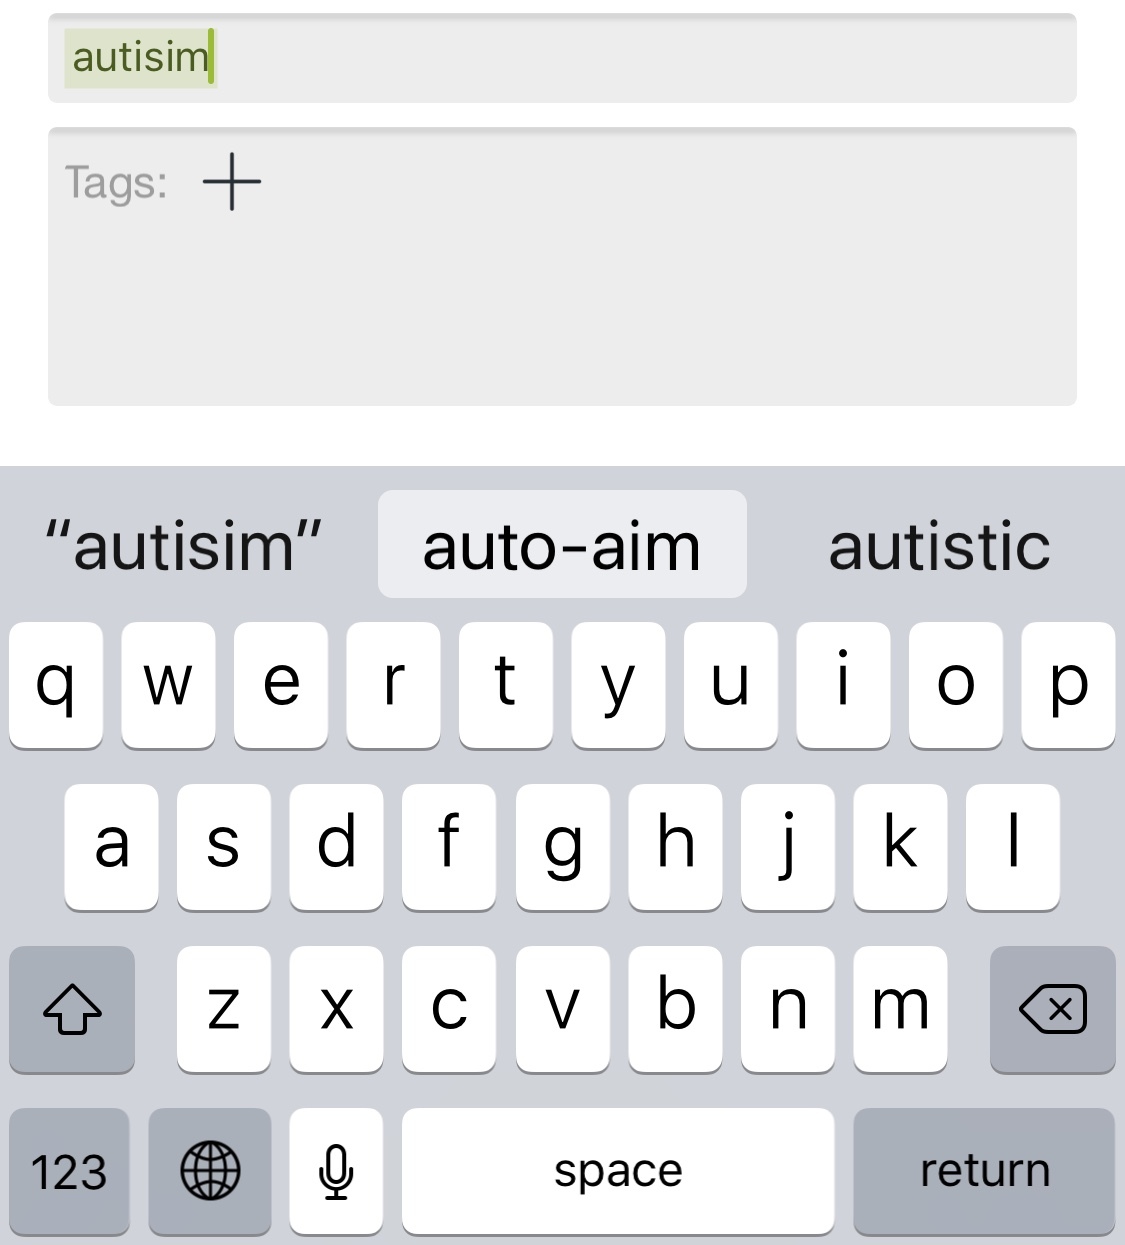 I have cracked the autistic code - meme